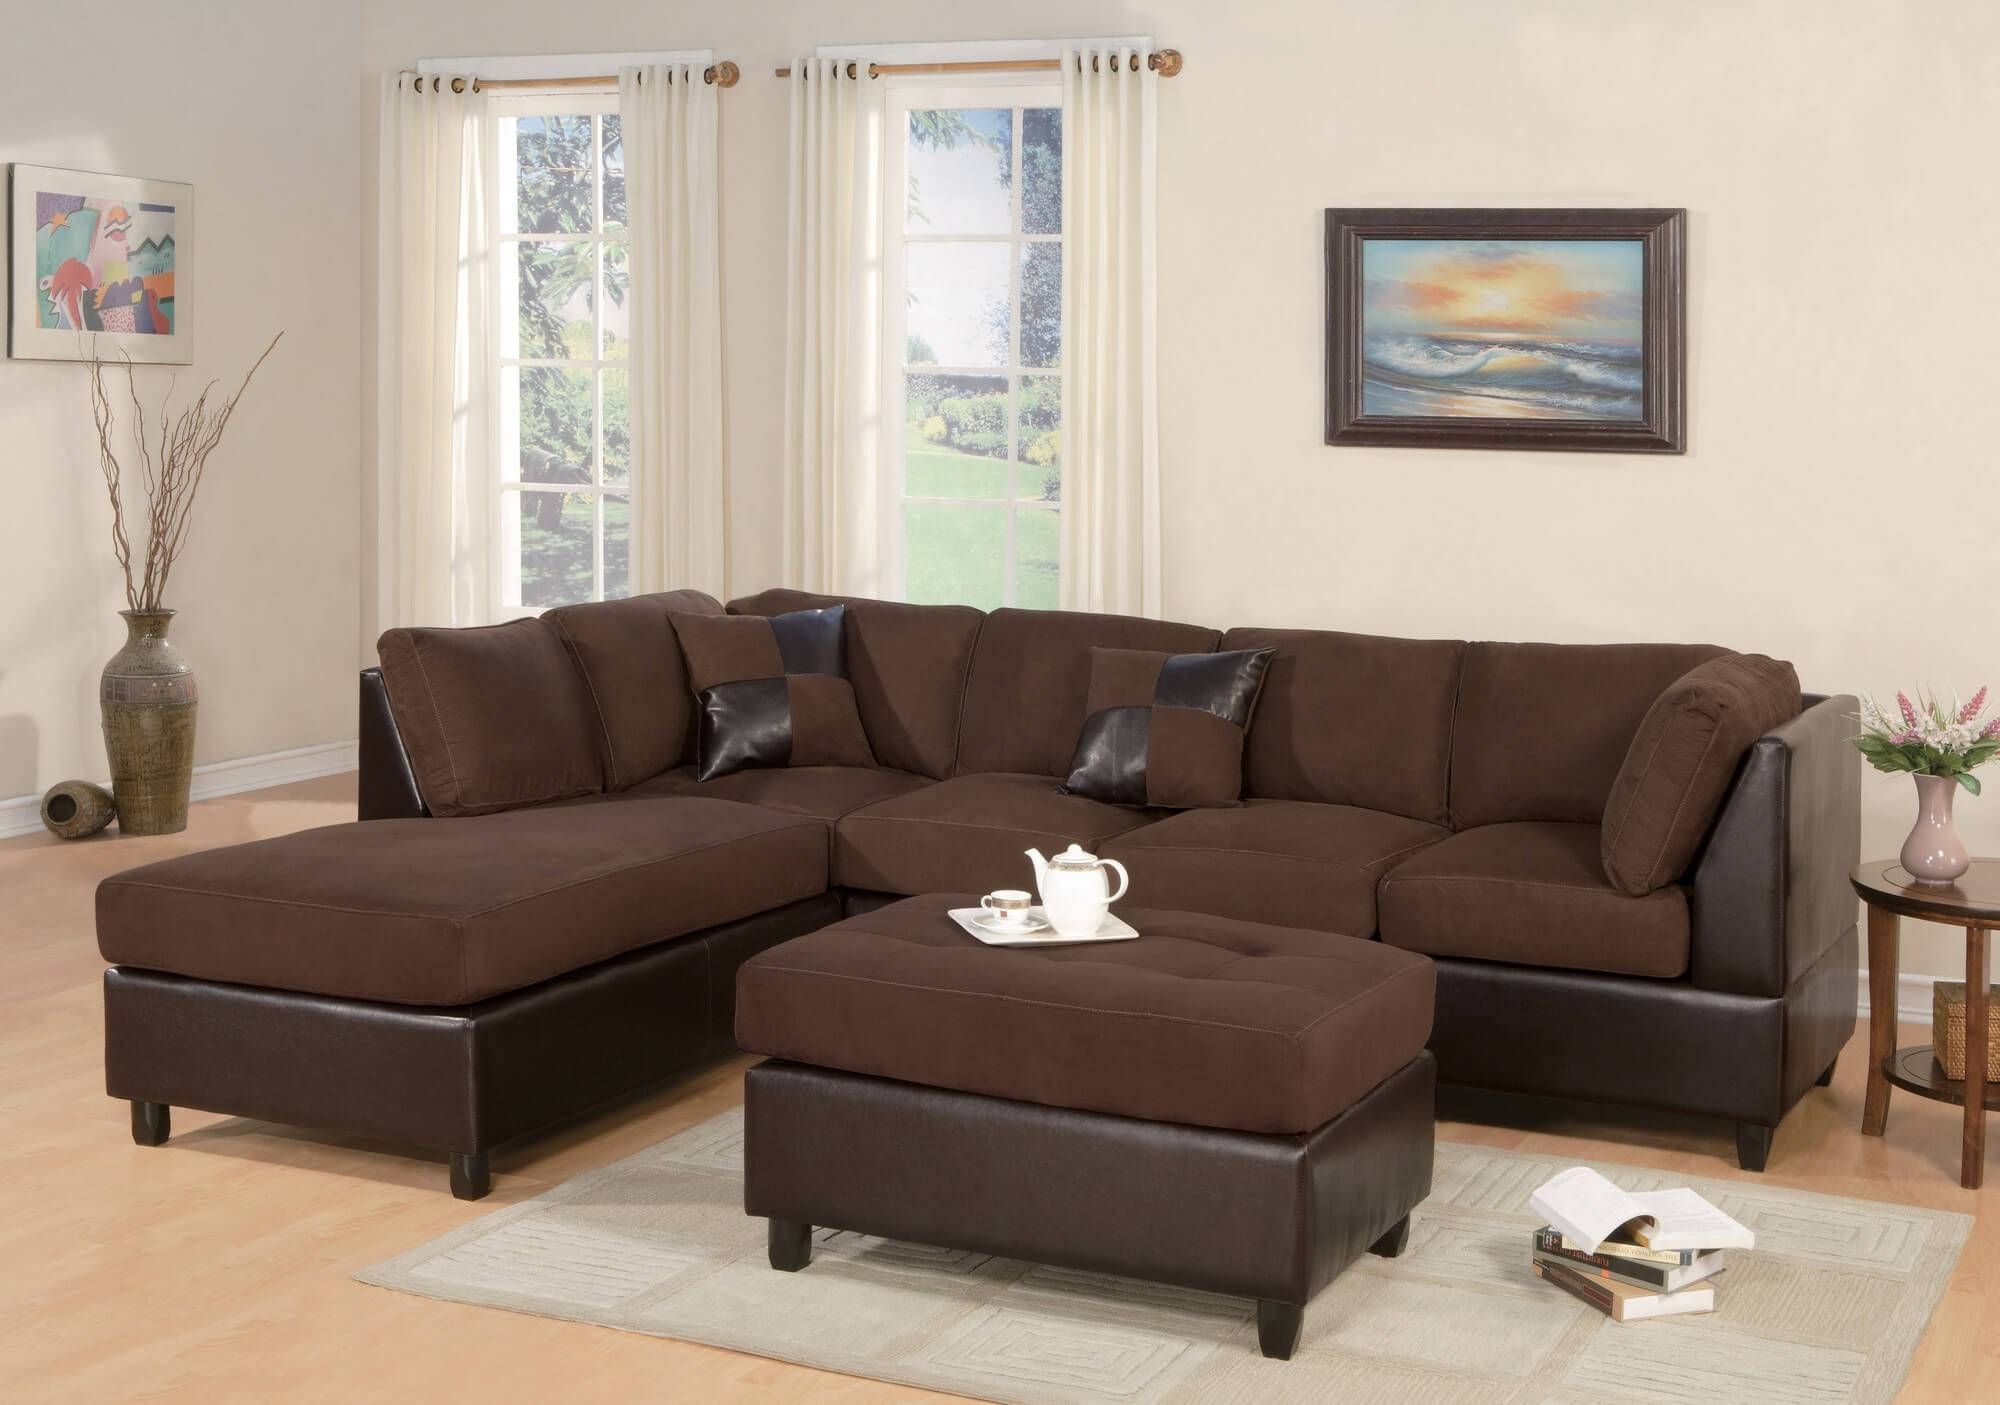 100 Beautiful Sectional Sofas Under $1,000 Pertaining To Comfortable Sectional Sofa (View 10 of 30)